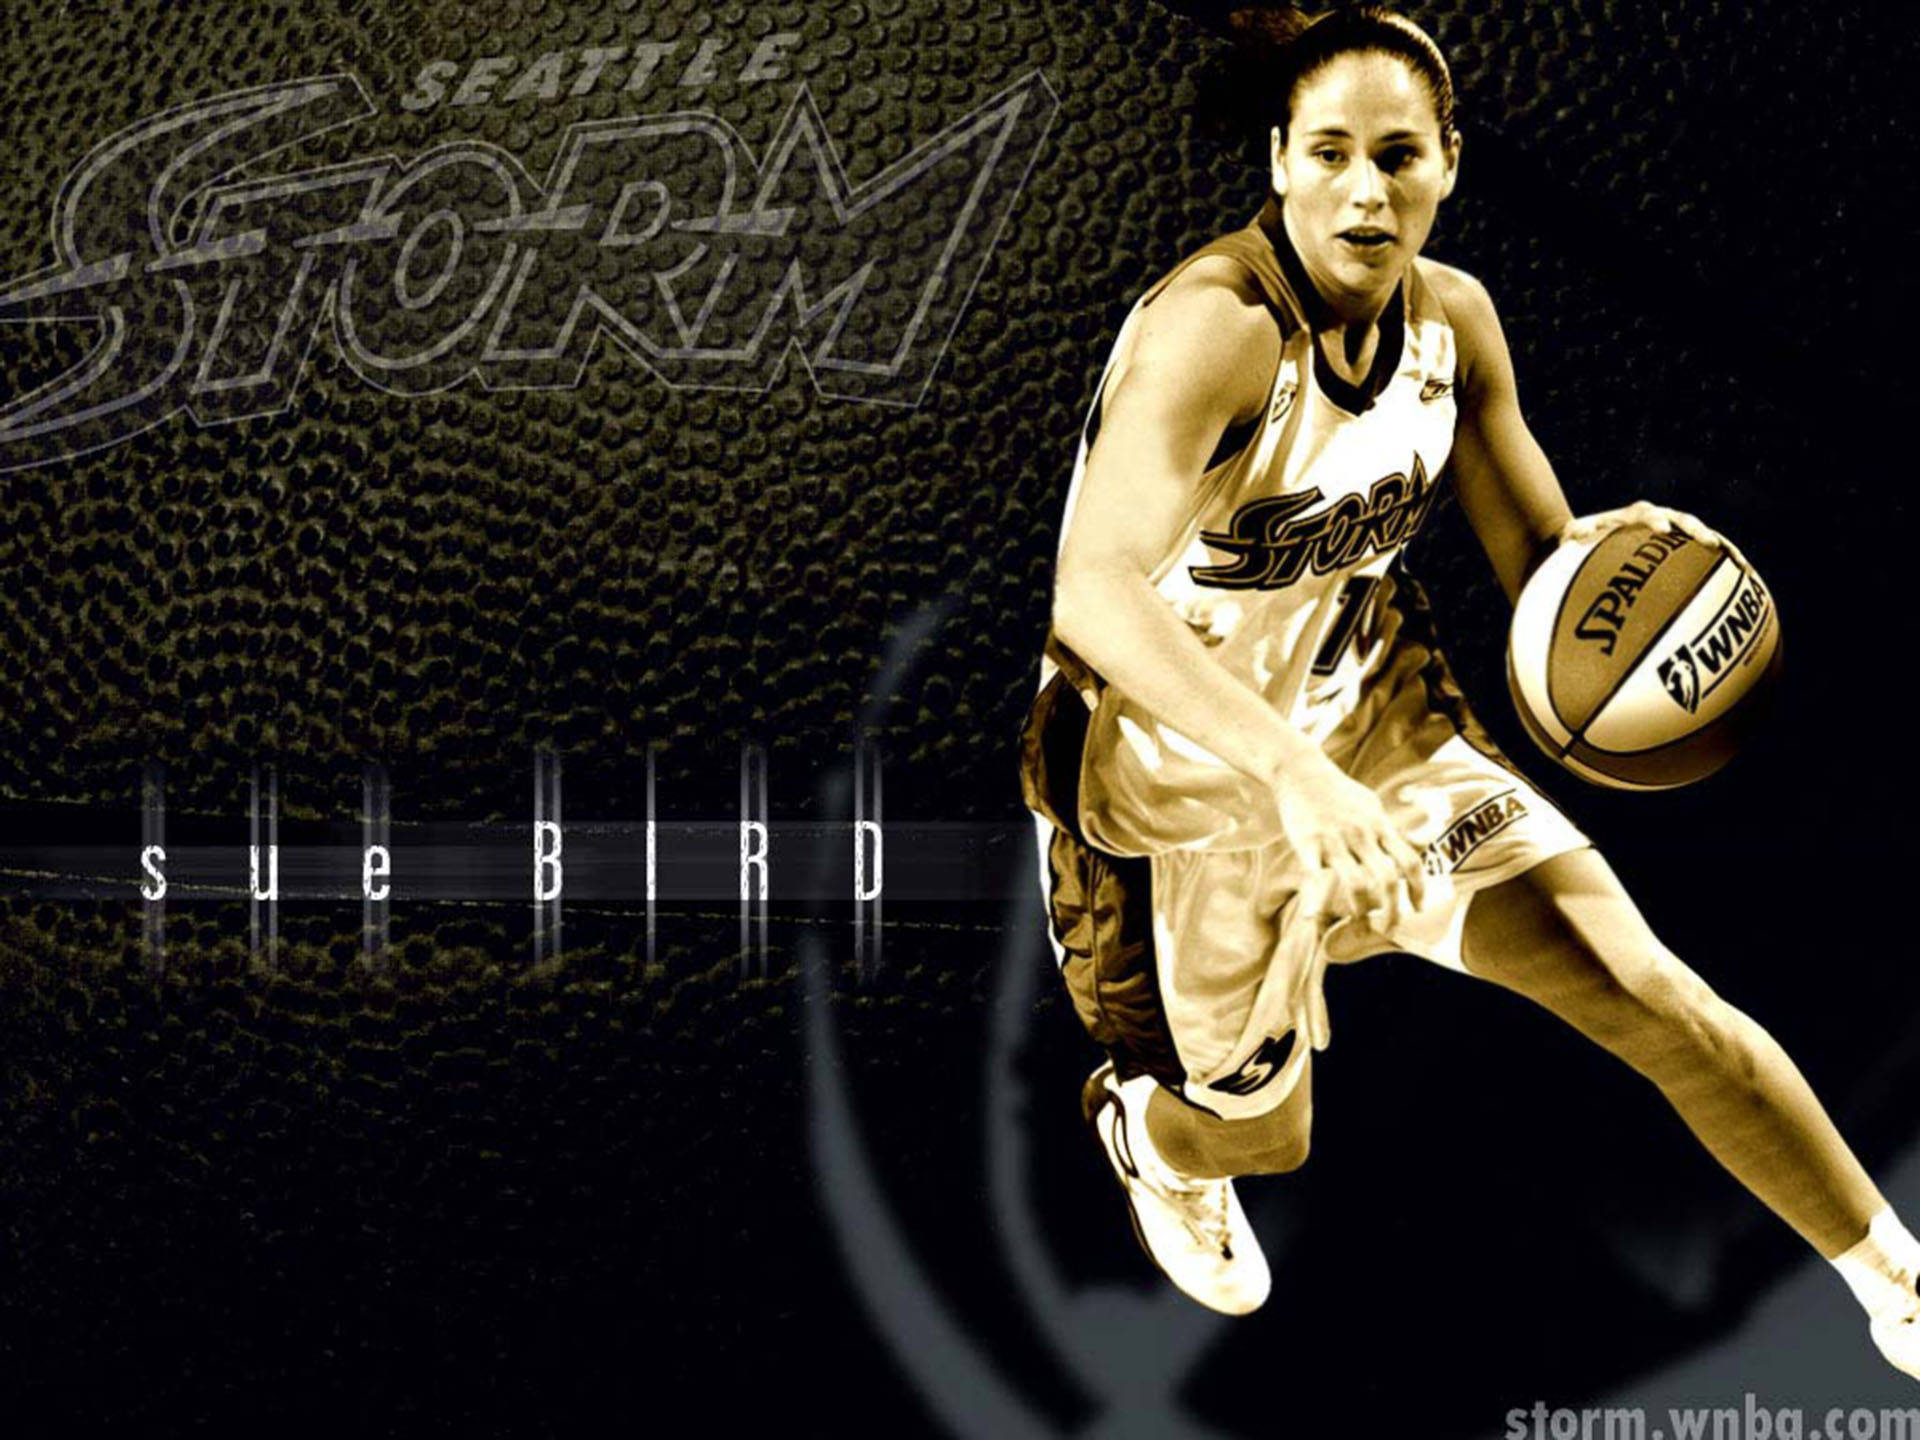 Sue Bird In Action, Dominating The Basketball Court